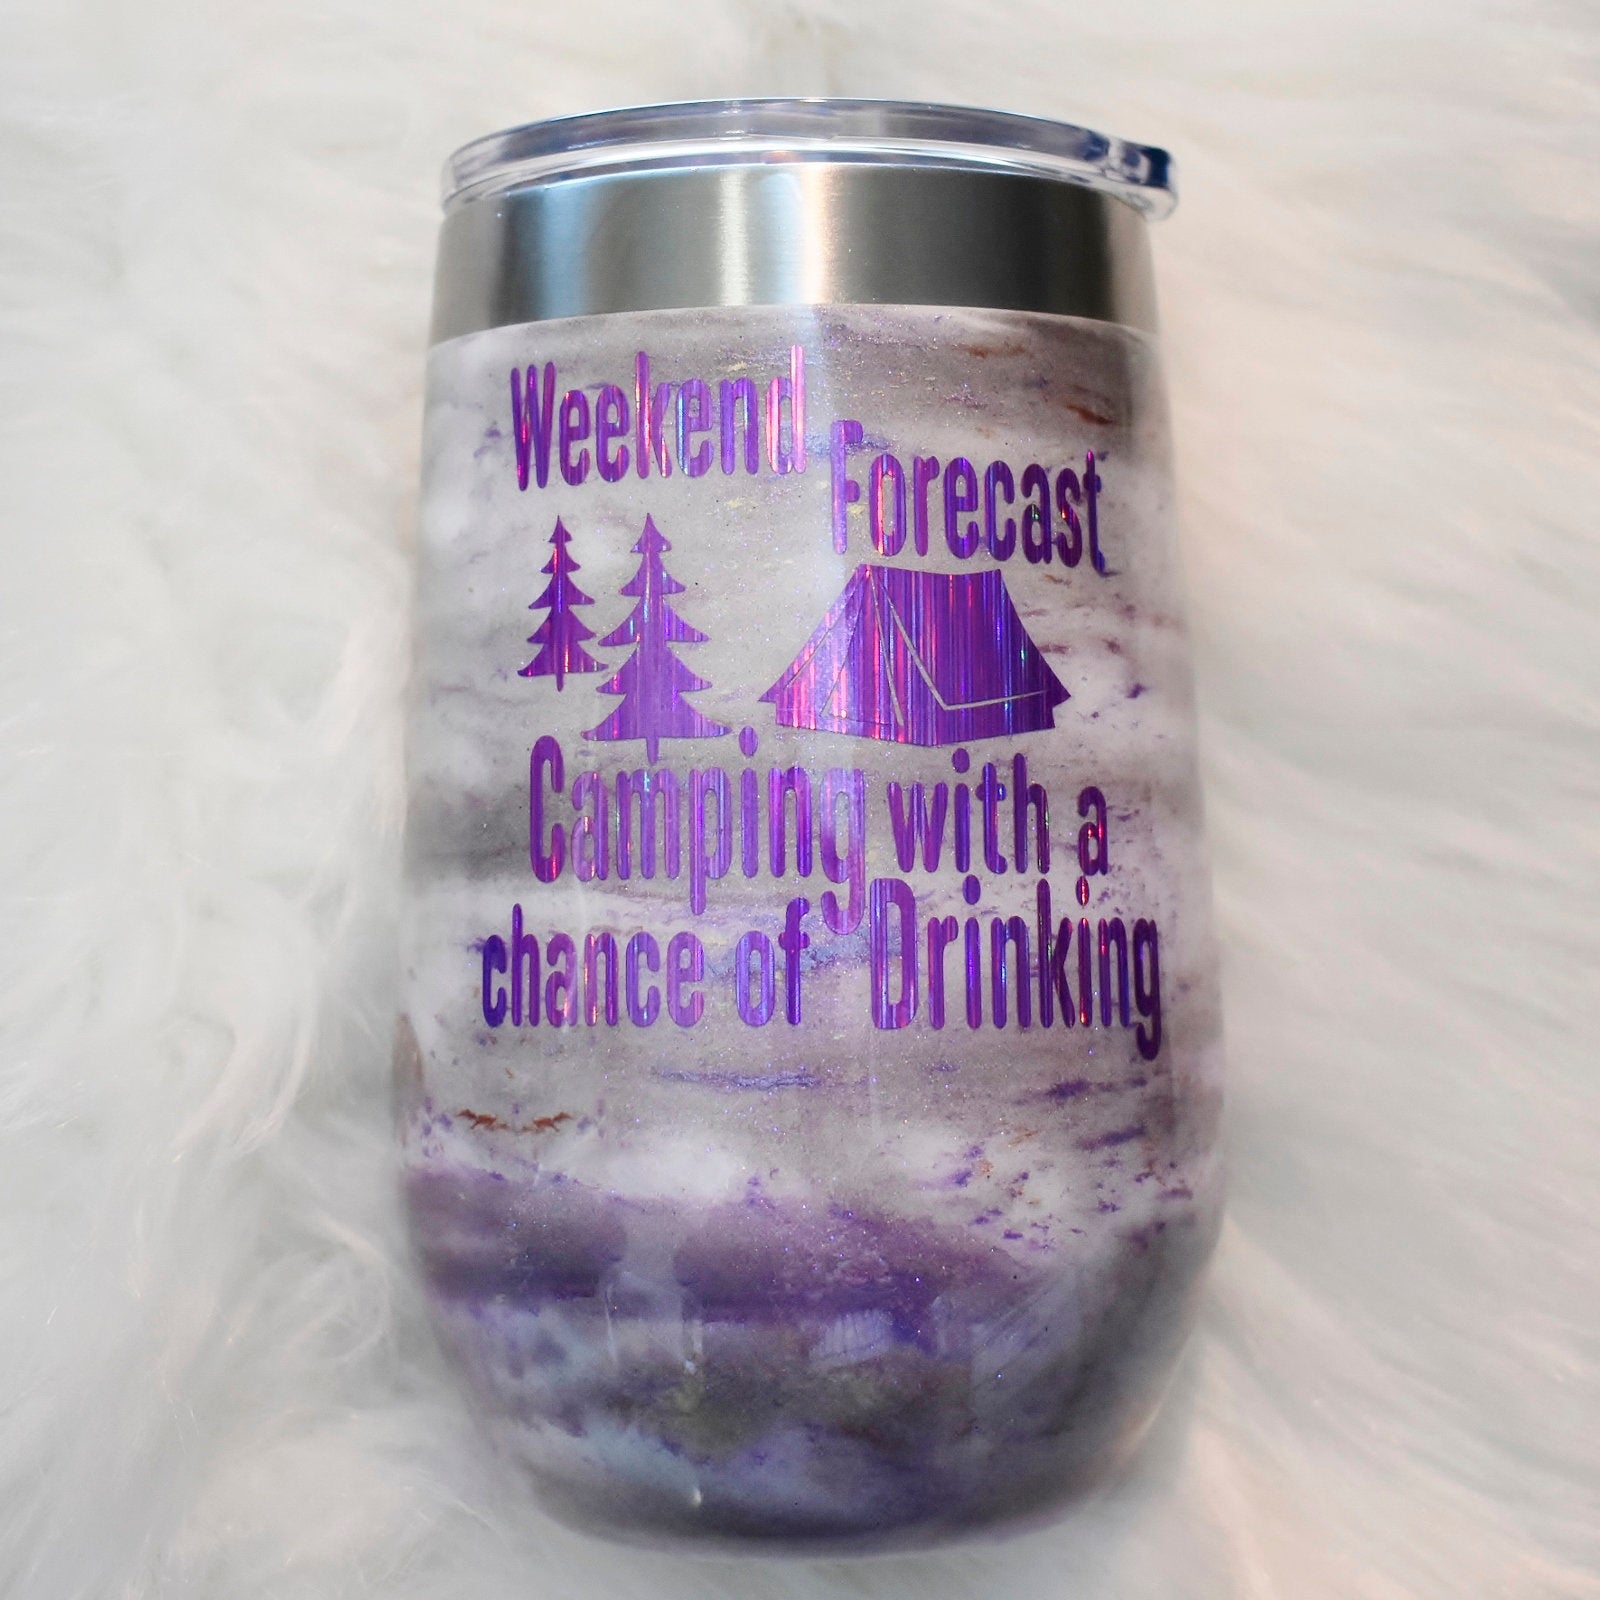 Weekend Forecast Camping glitter mica 16 oz stainless steel wine glass | Camper Gift | Glamper | Wine Lover | Camping Fun | Birthday Wine